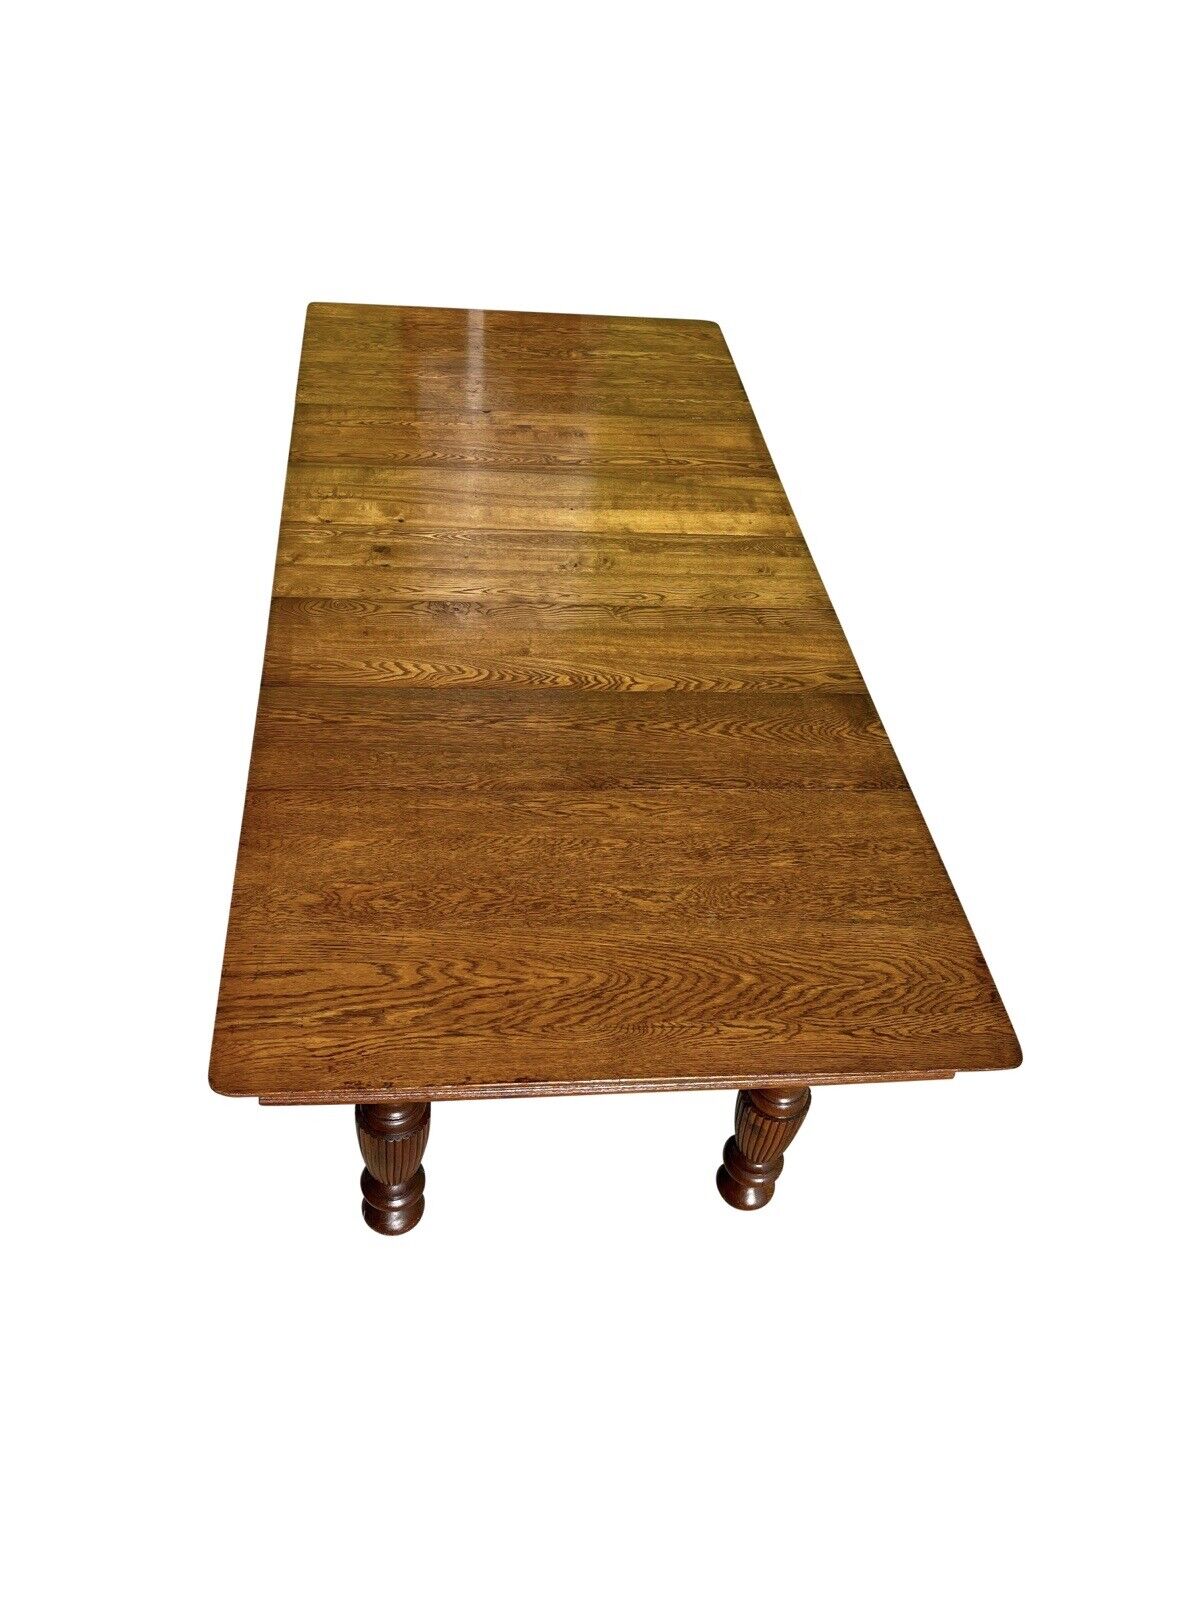 19th C Antique Victorian Oak Dining Table With 5 Leaves - 7.5+ Feet Long